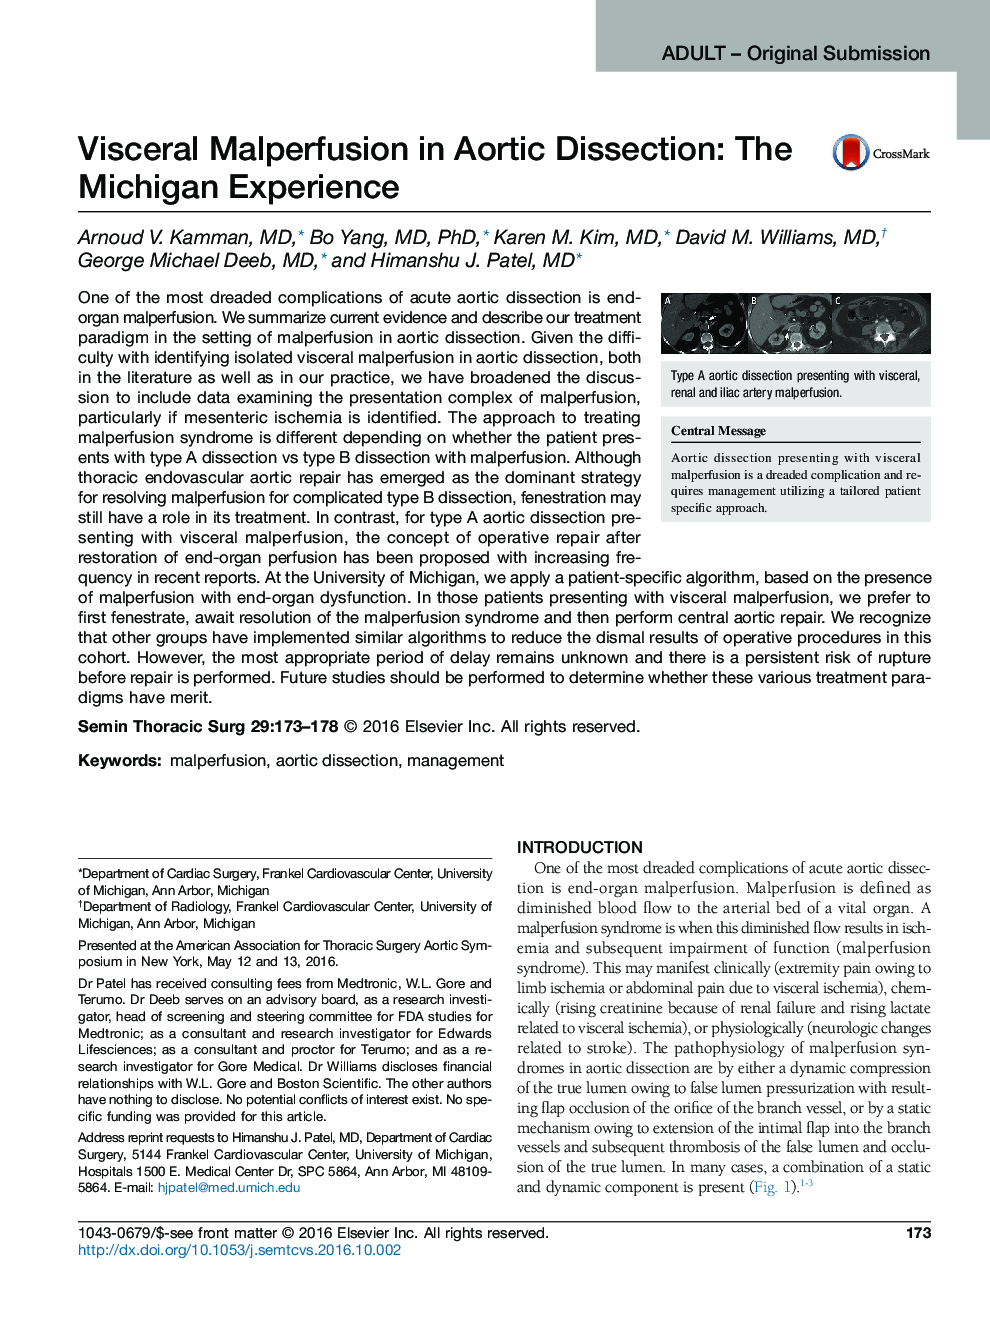 Adult - Original SubmissionVisceral Malperfusion in Aortic Dissection: The Michigan Experience